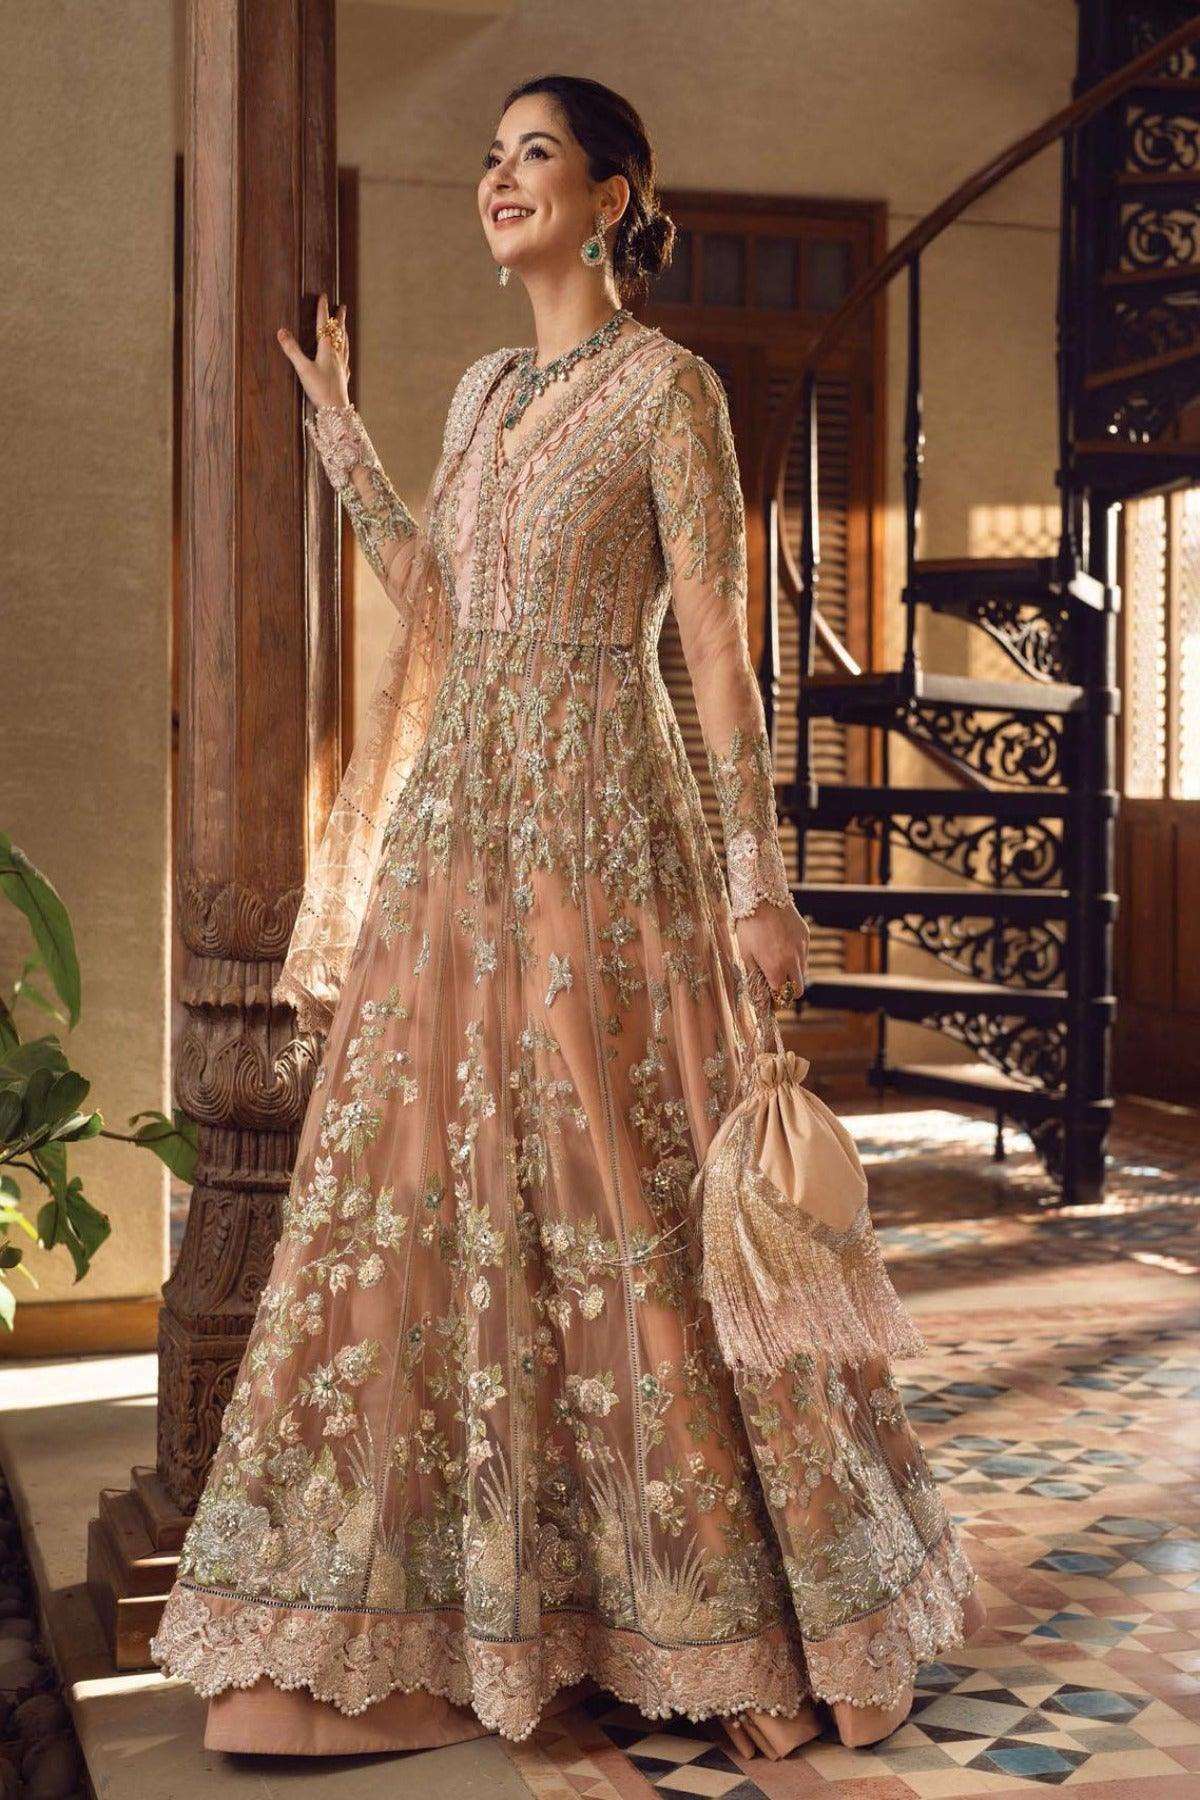 Aik Jhalak by Crimson Embroidered Suits Unstitched 3 Piece D8 - An Ethereal Fantasy Luxury Wedding Collection - Yumnaz